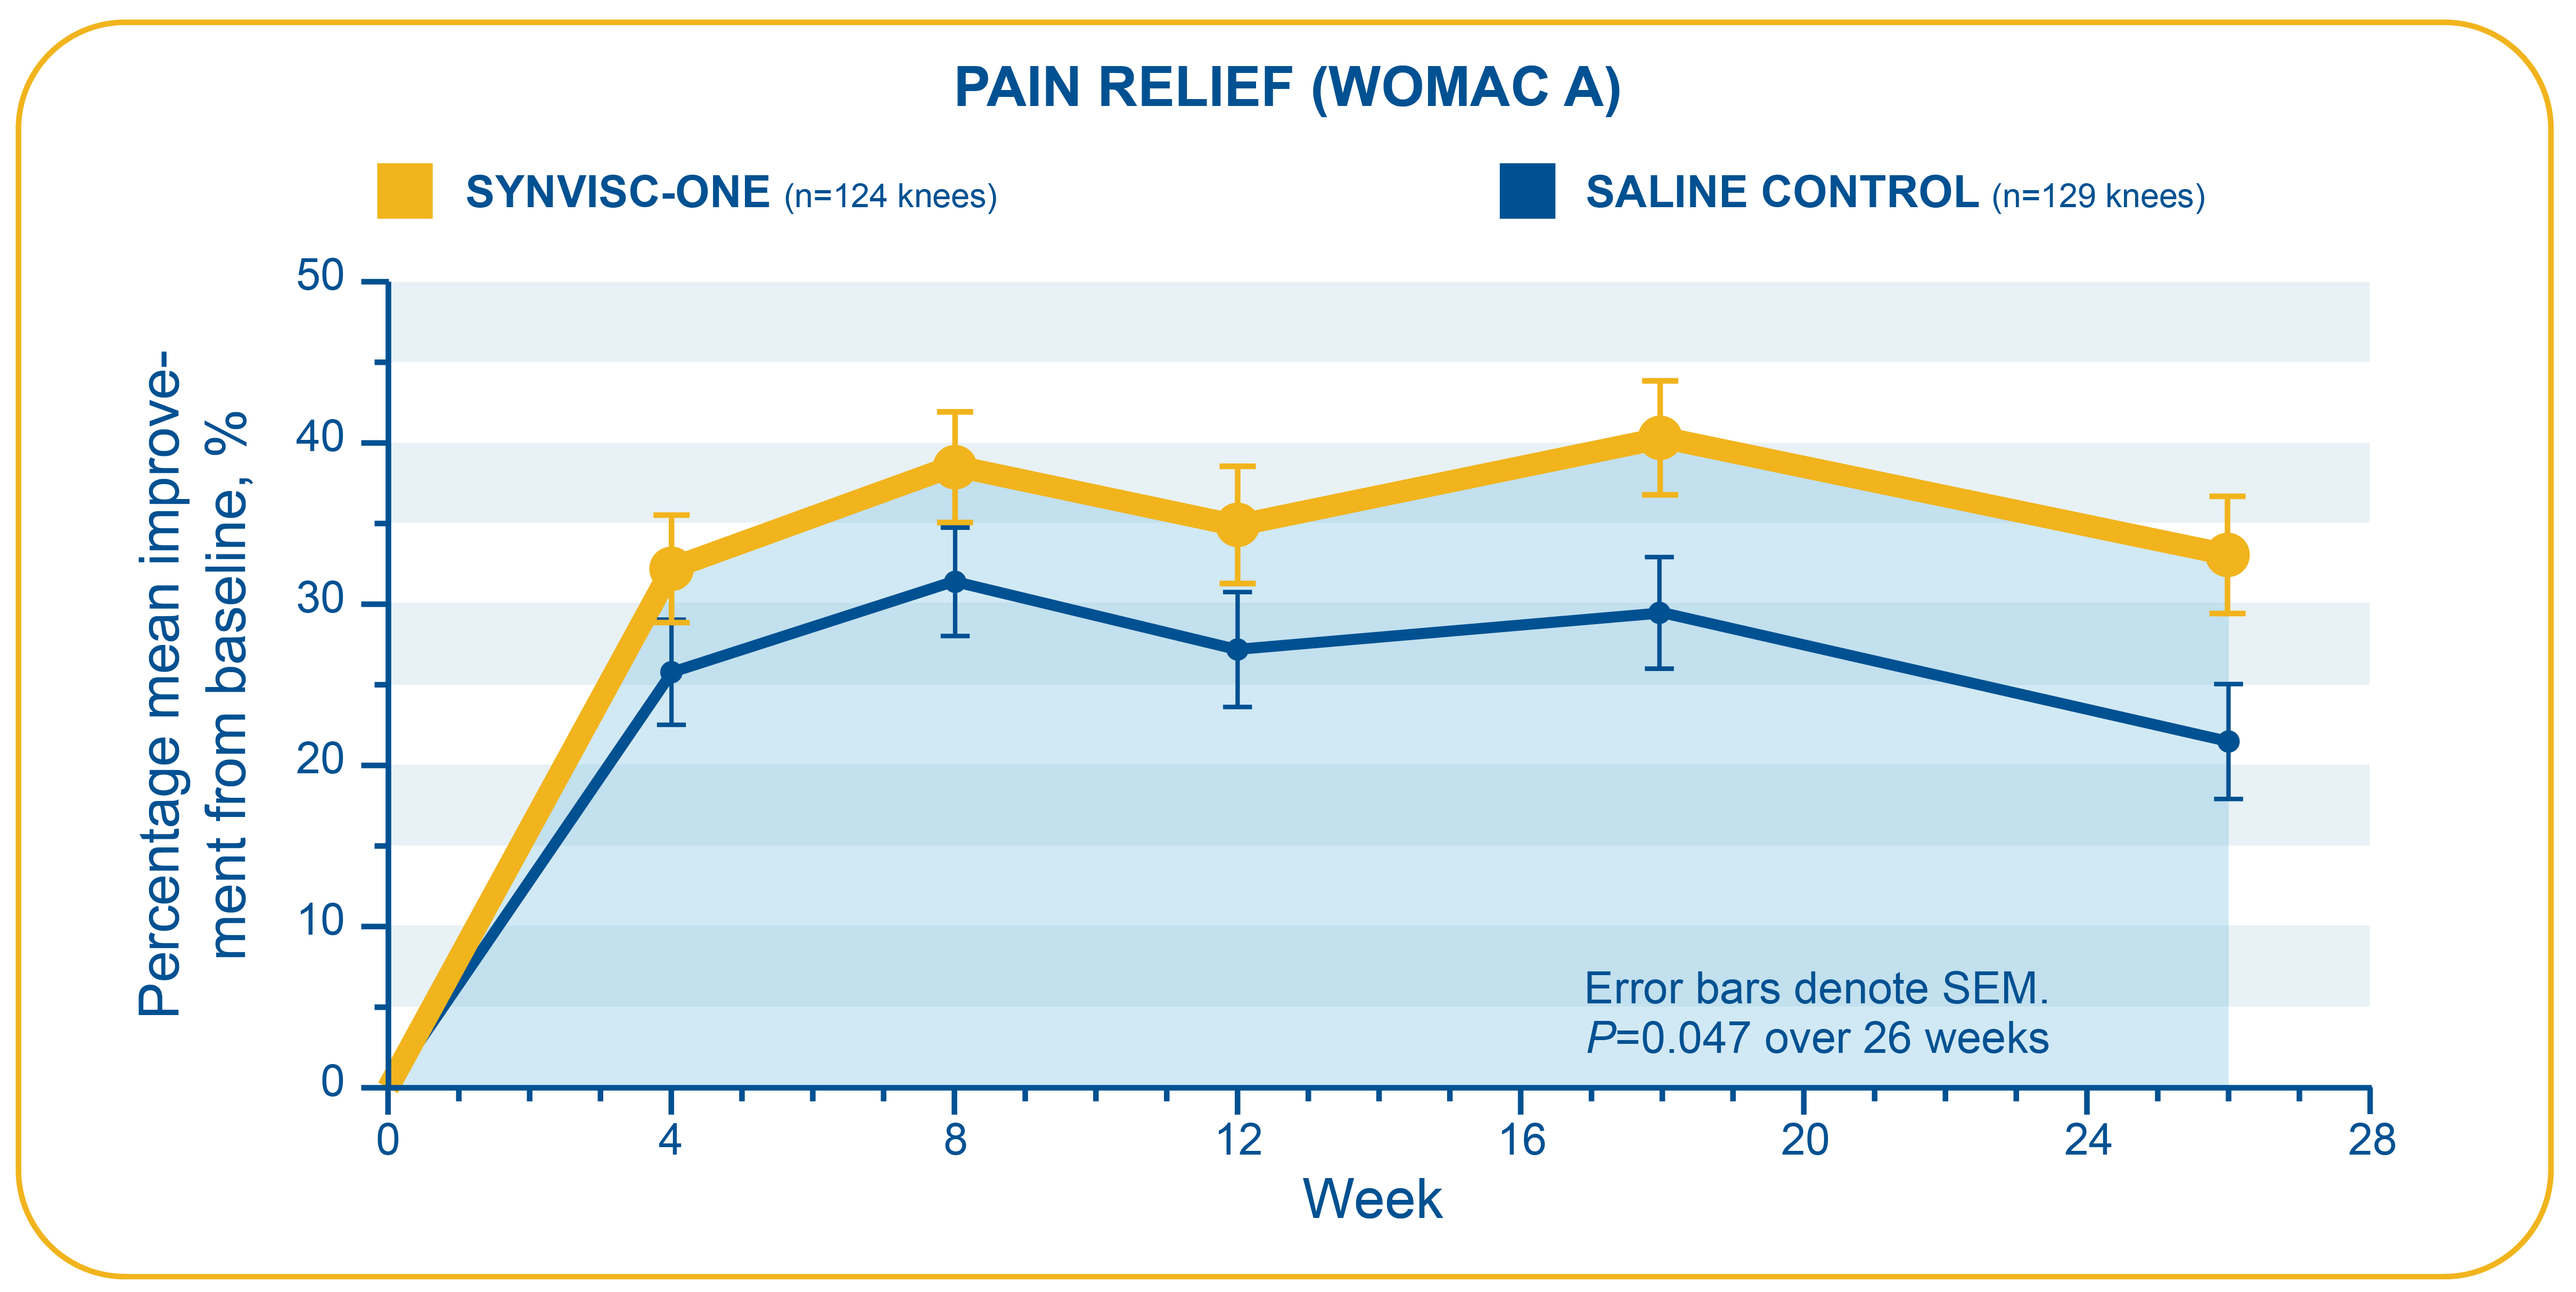 A graph showing long‐lasting OA knee pain relief demonstrated by SYNVISC‐ONE® (Hylan G‐F 20) in clinical studies vs saline